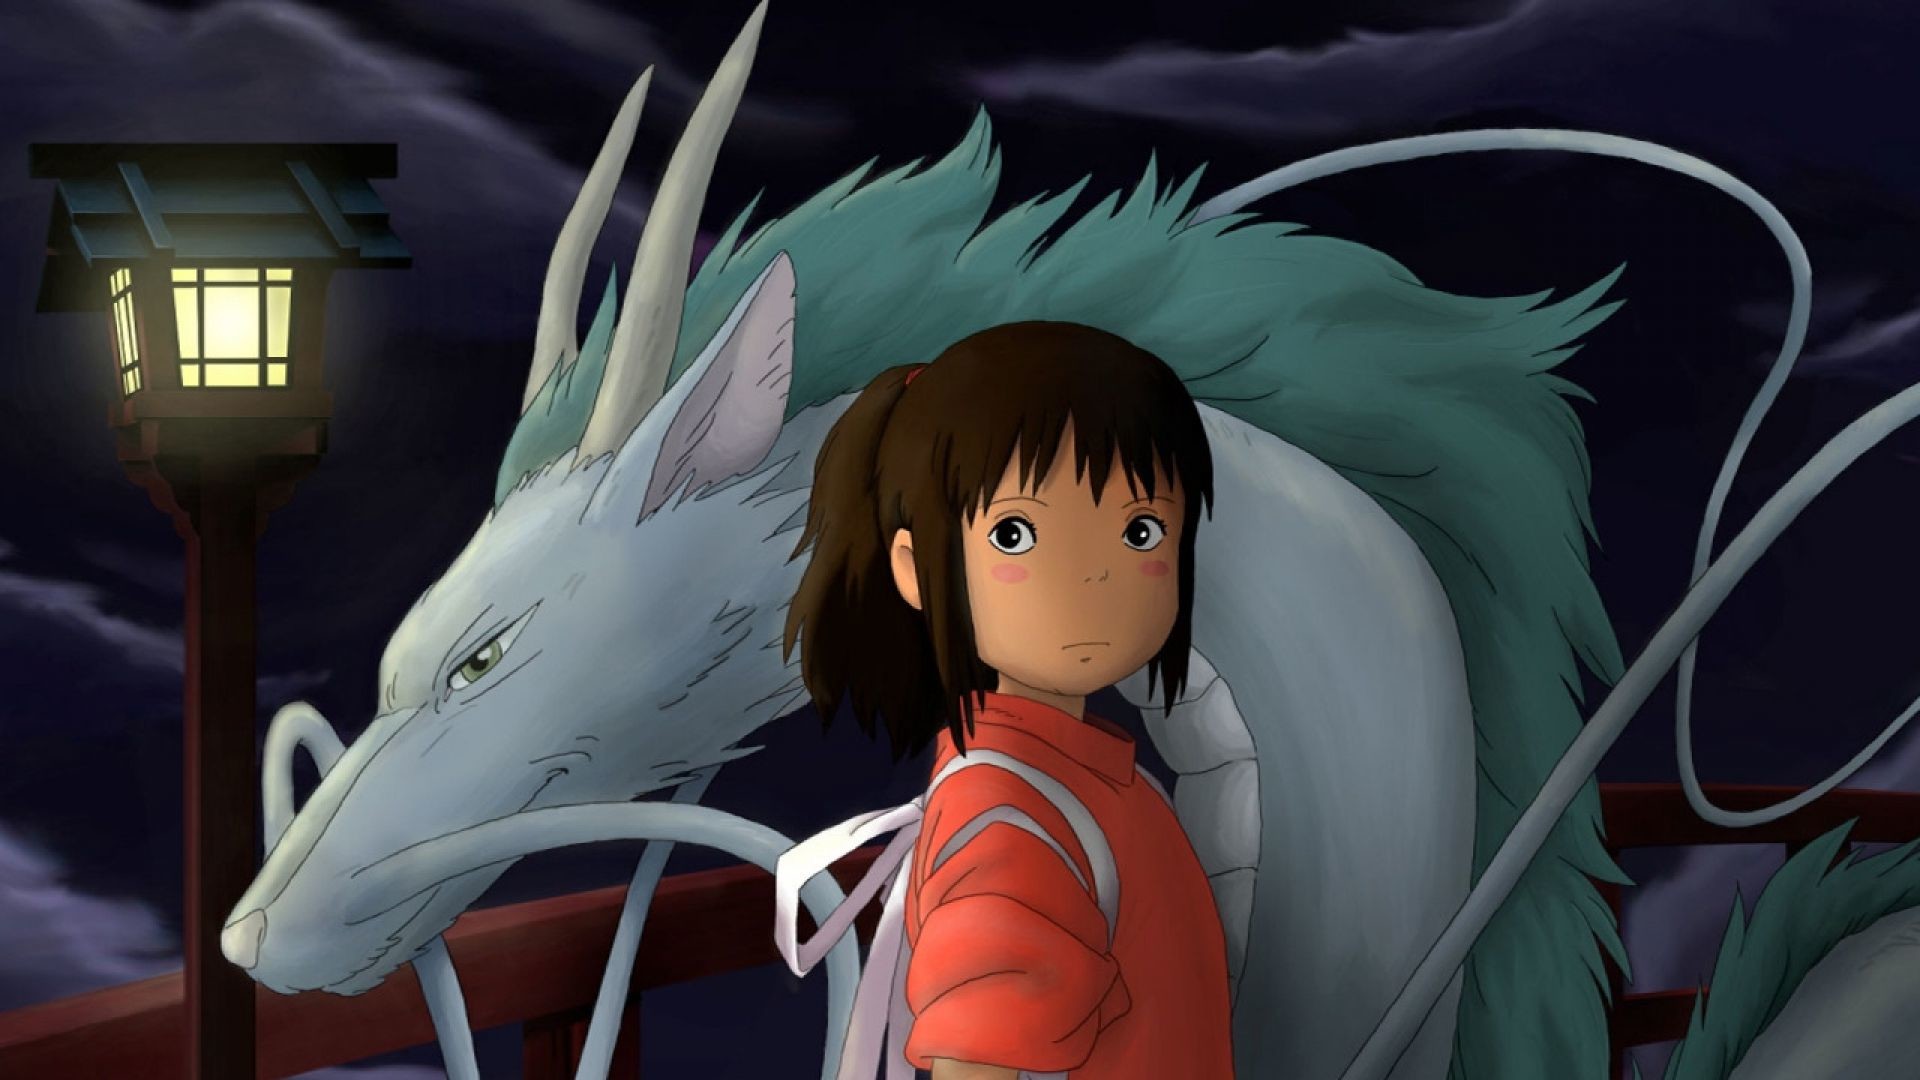 Spirited Away Film Cartoon Pictures For iMac Cartoons Wallpapers